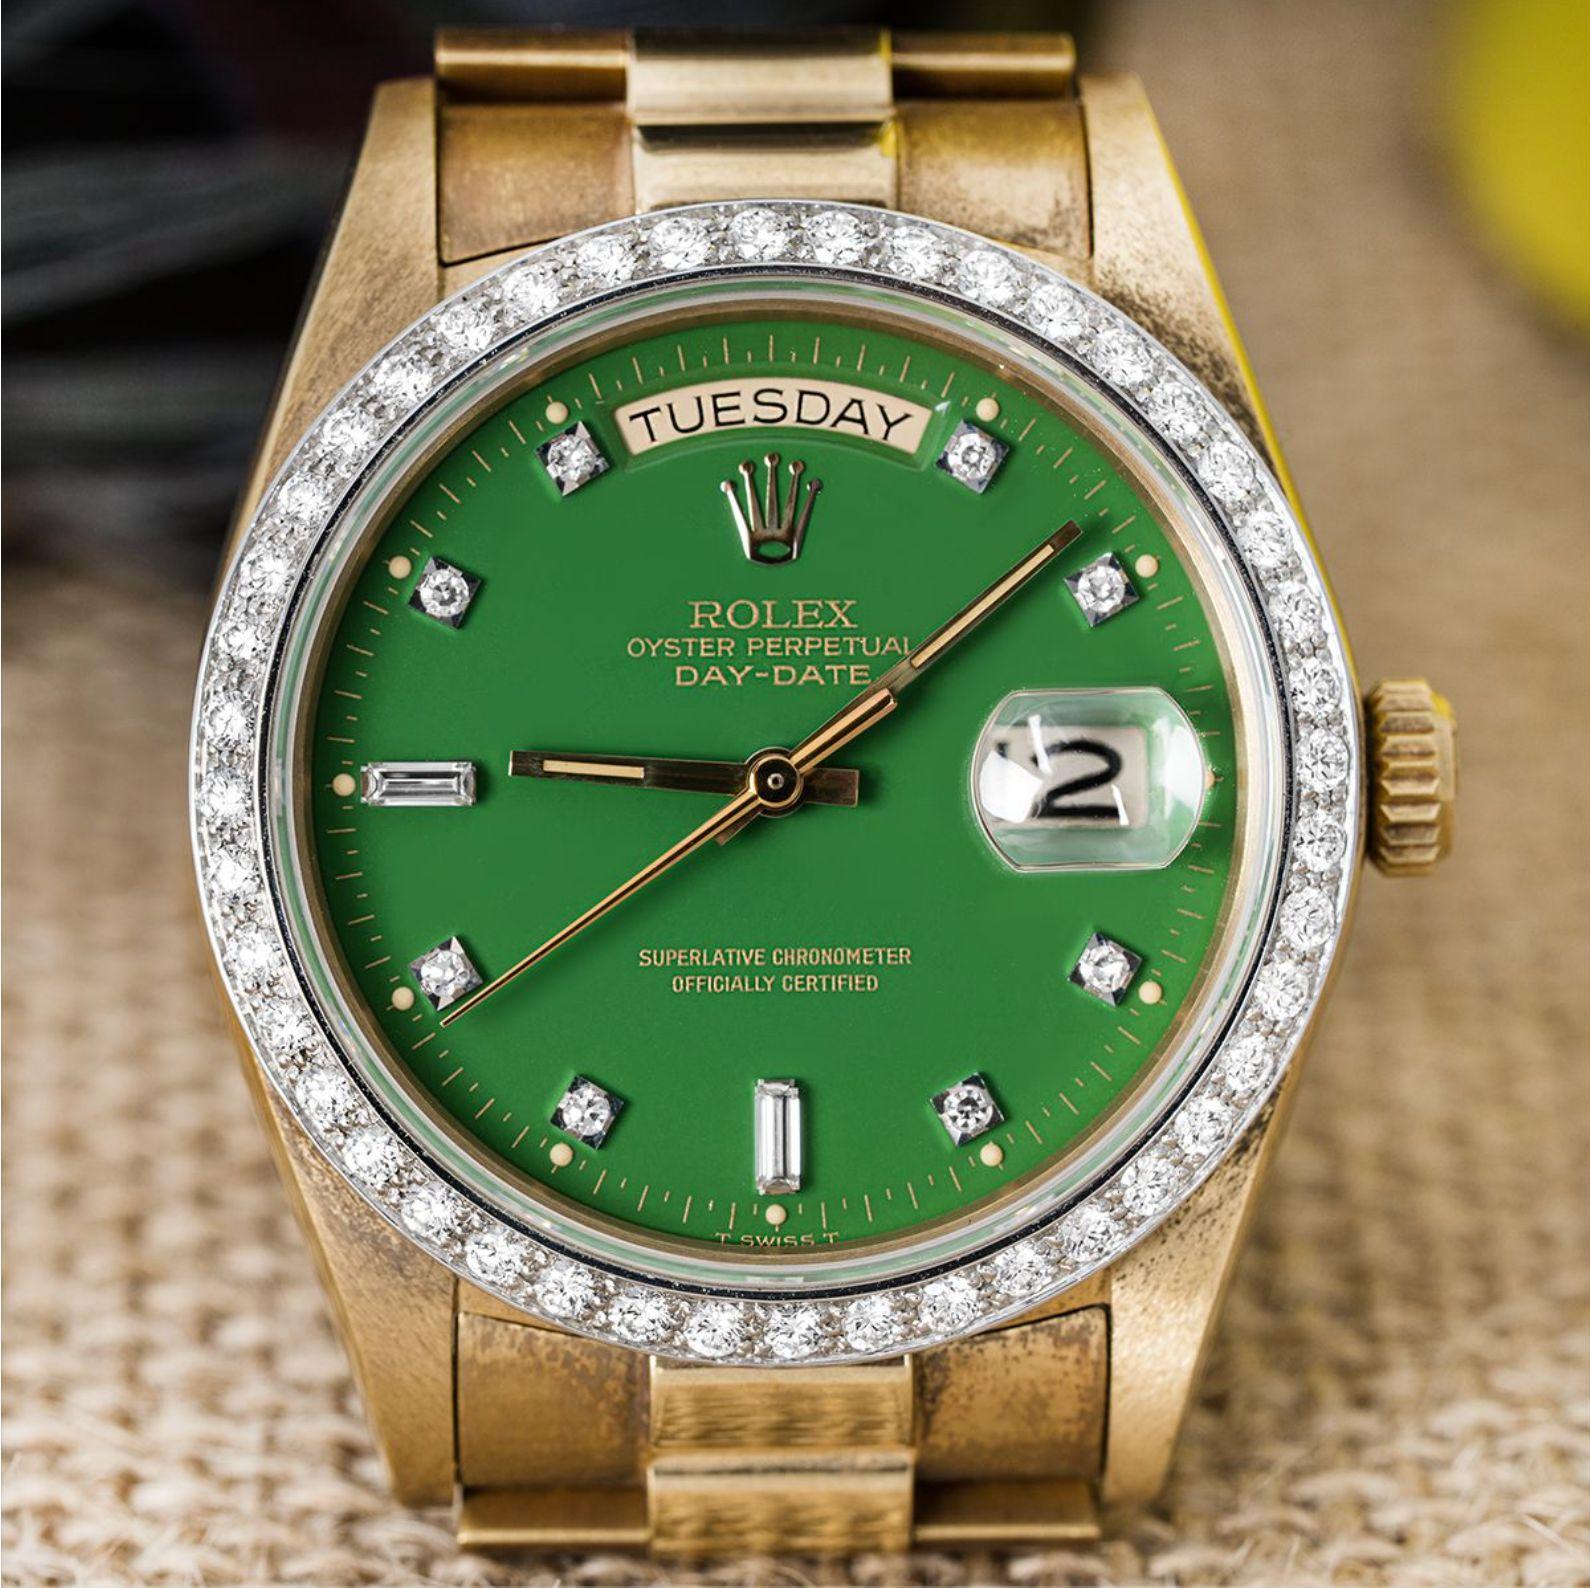 A rare NOS yellow gold Day-Date by Rolex from 1980. Featuring a stunning green Stella dial with diamond set hour markers and a fixed yellow gold fluted bezel set with 44 round brilliant cut diamonds.

The watch is fitted with a sapphire glass, a